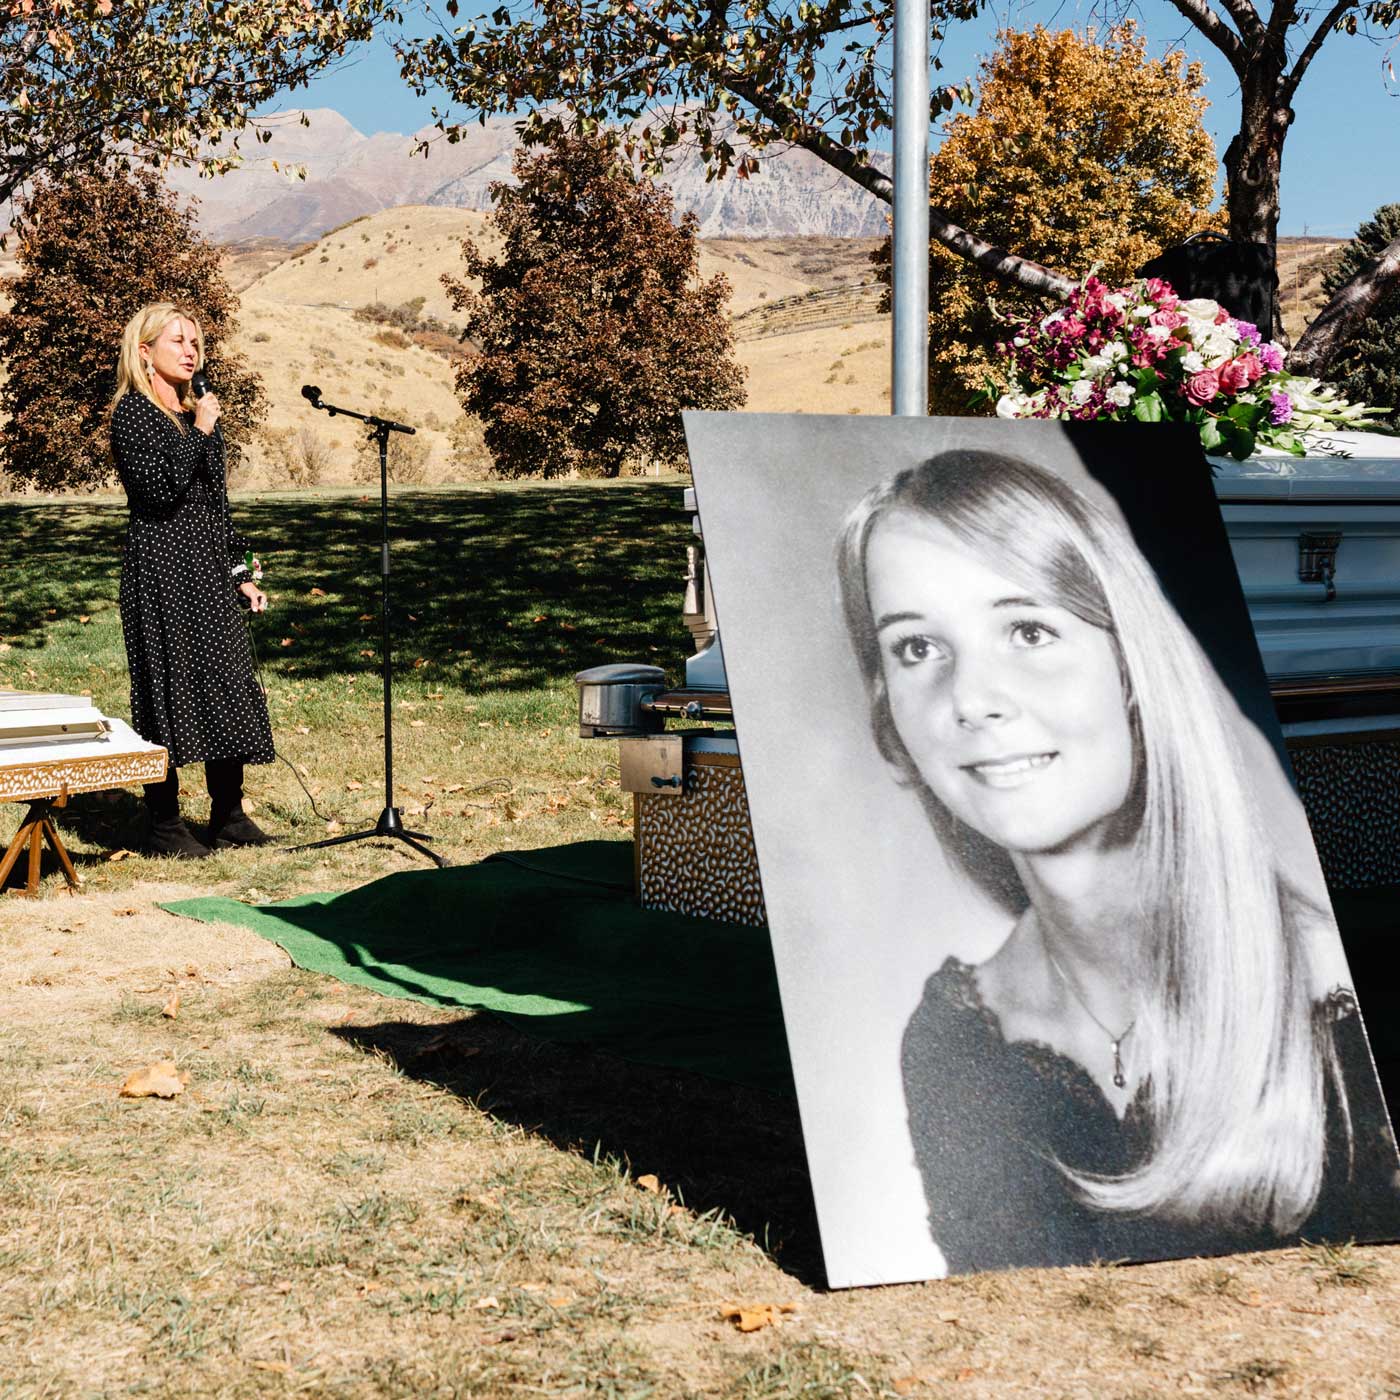 Photo Displays for a Funeral